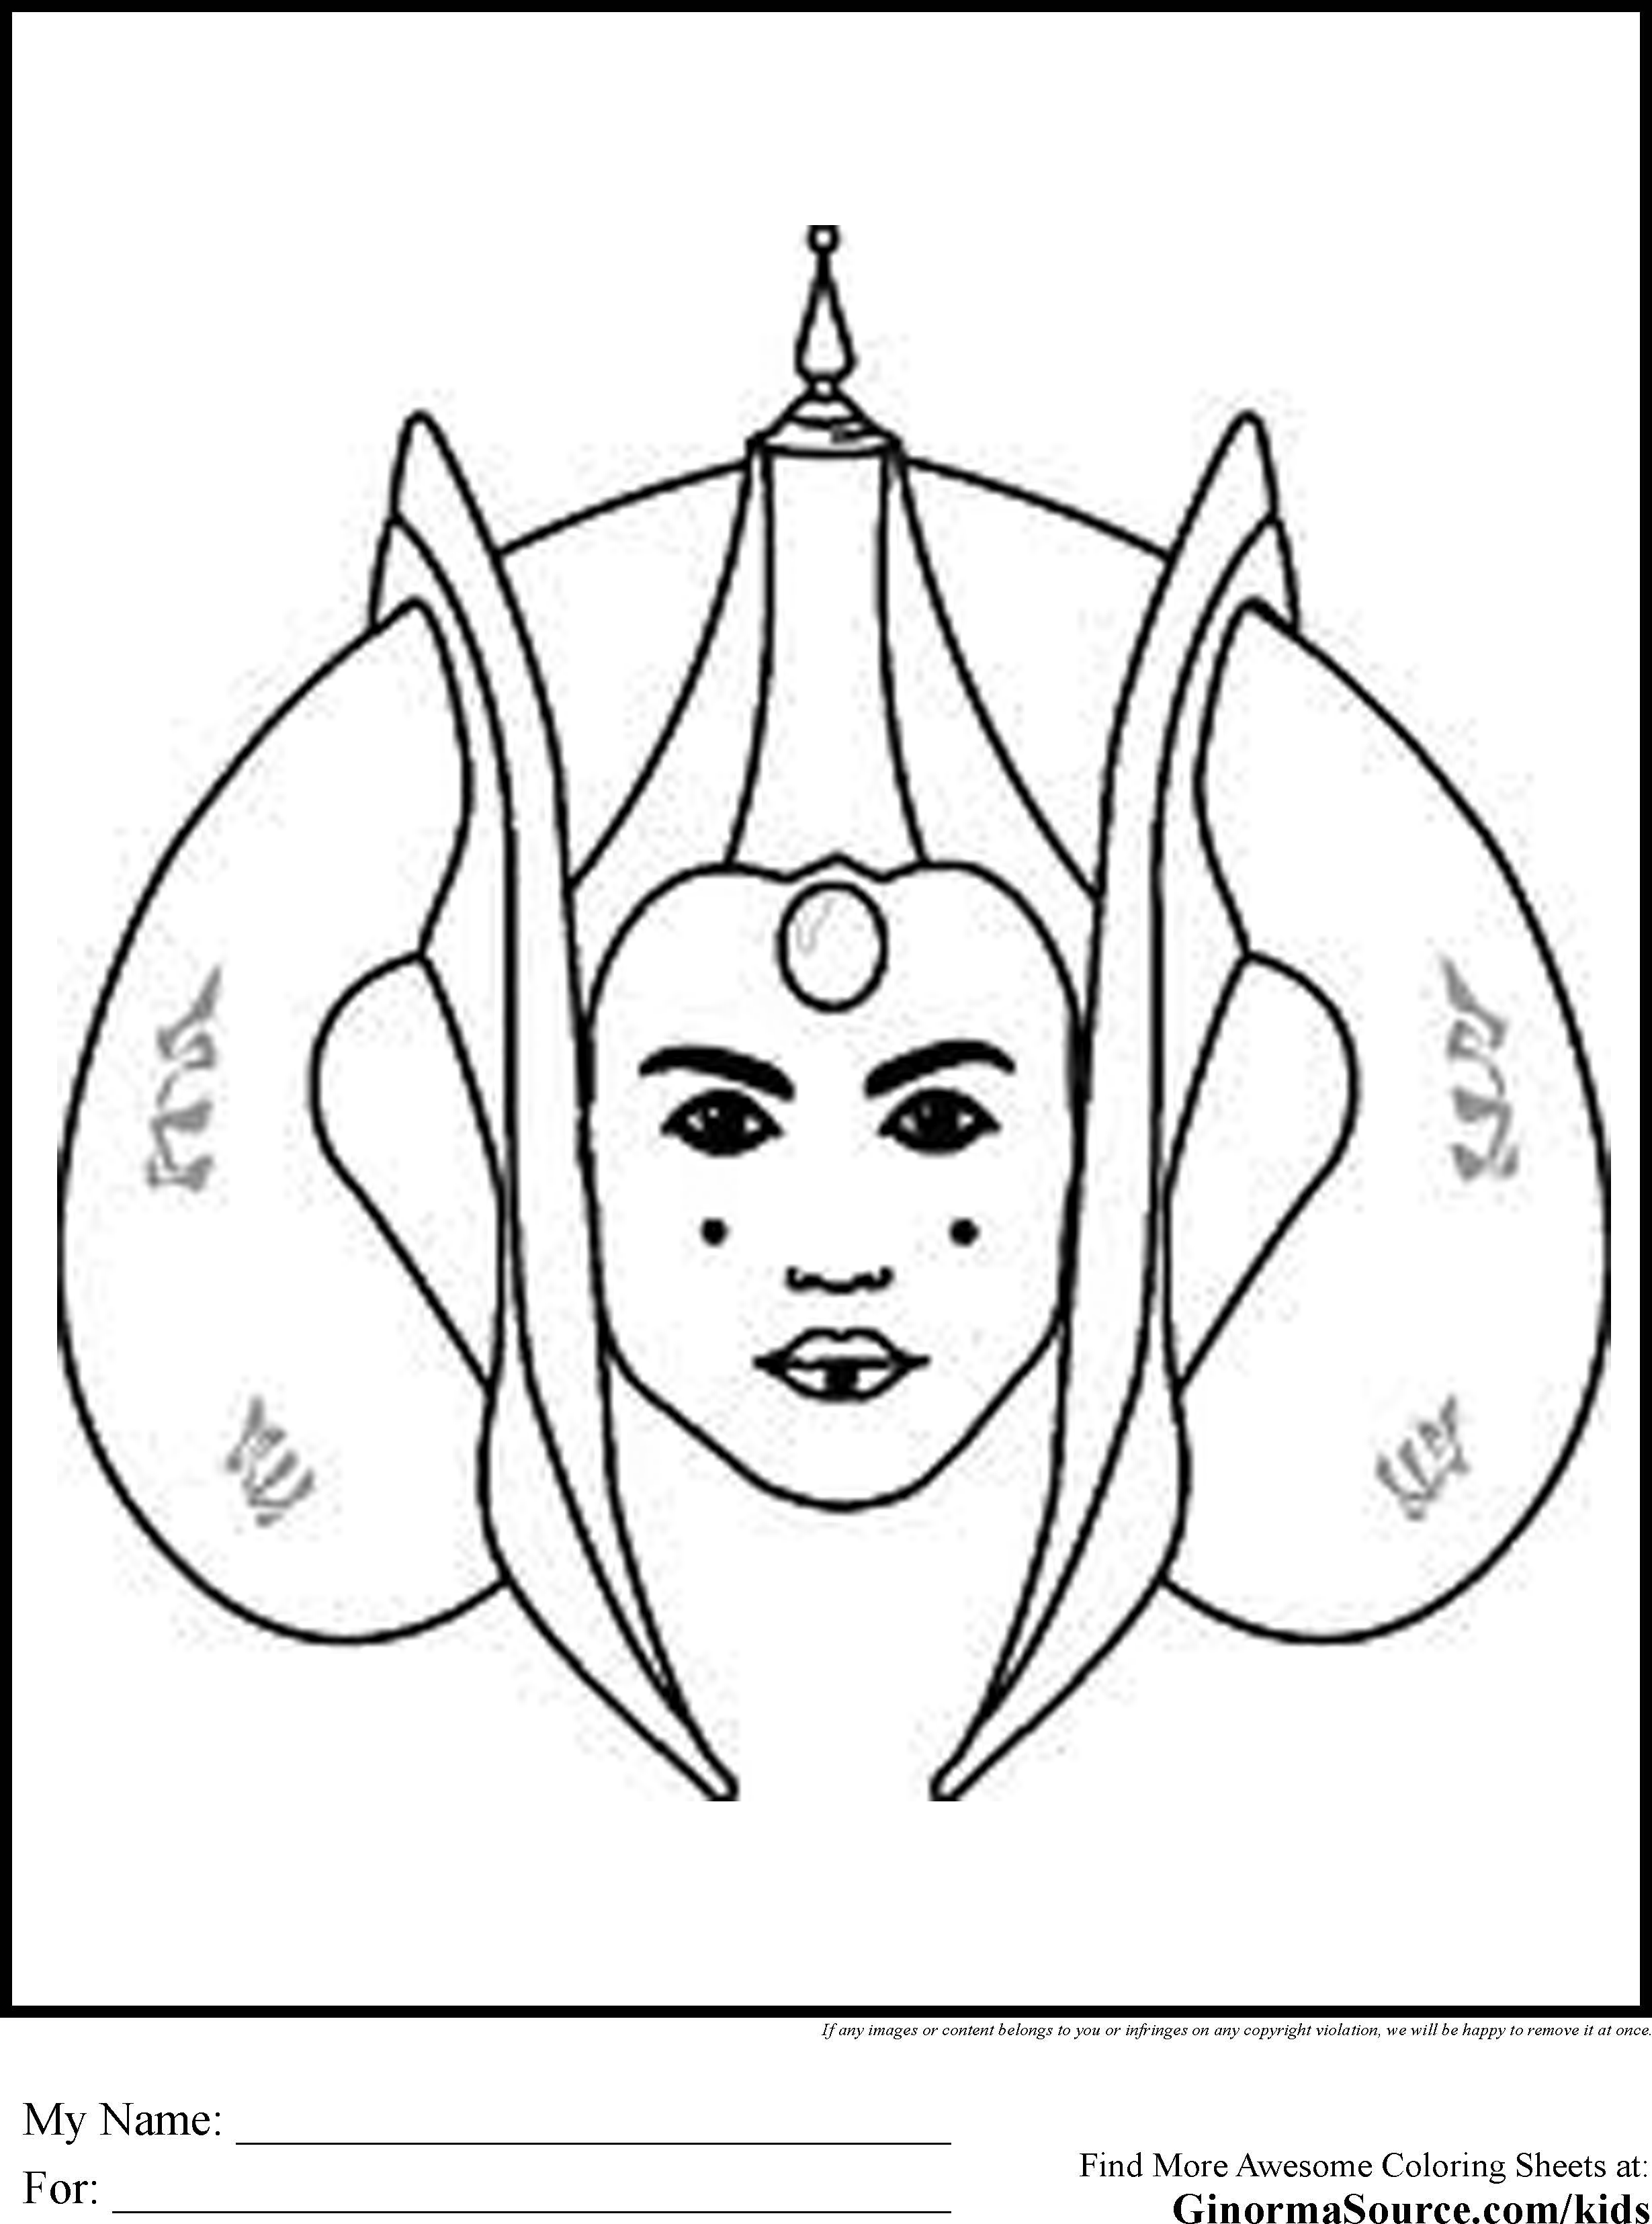 8 Pics of Star Wars Queen Amidala Coloring Pages - Star Wars Padme ...